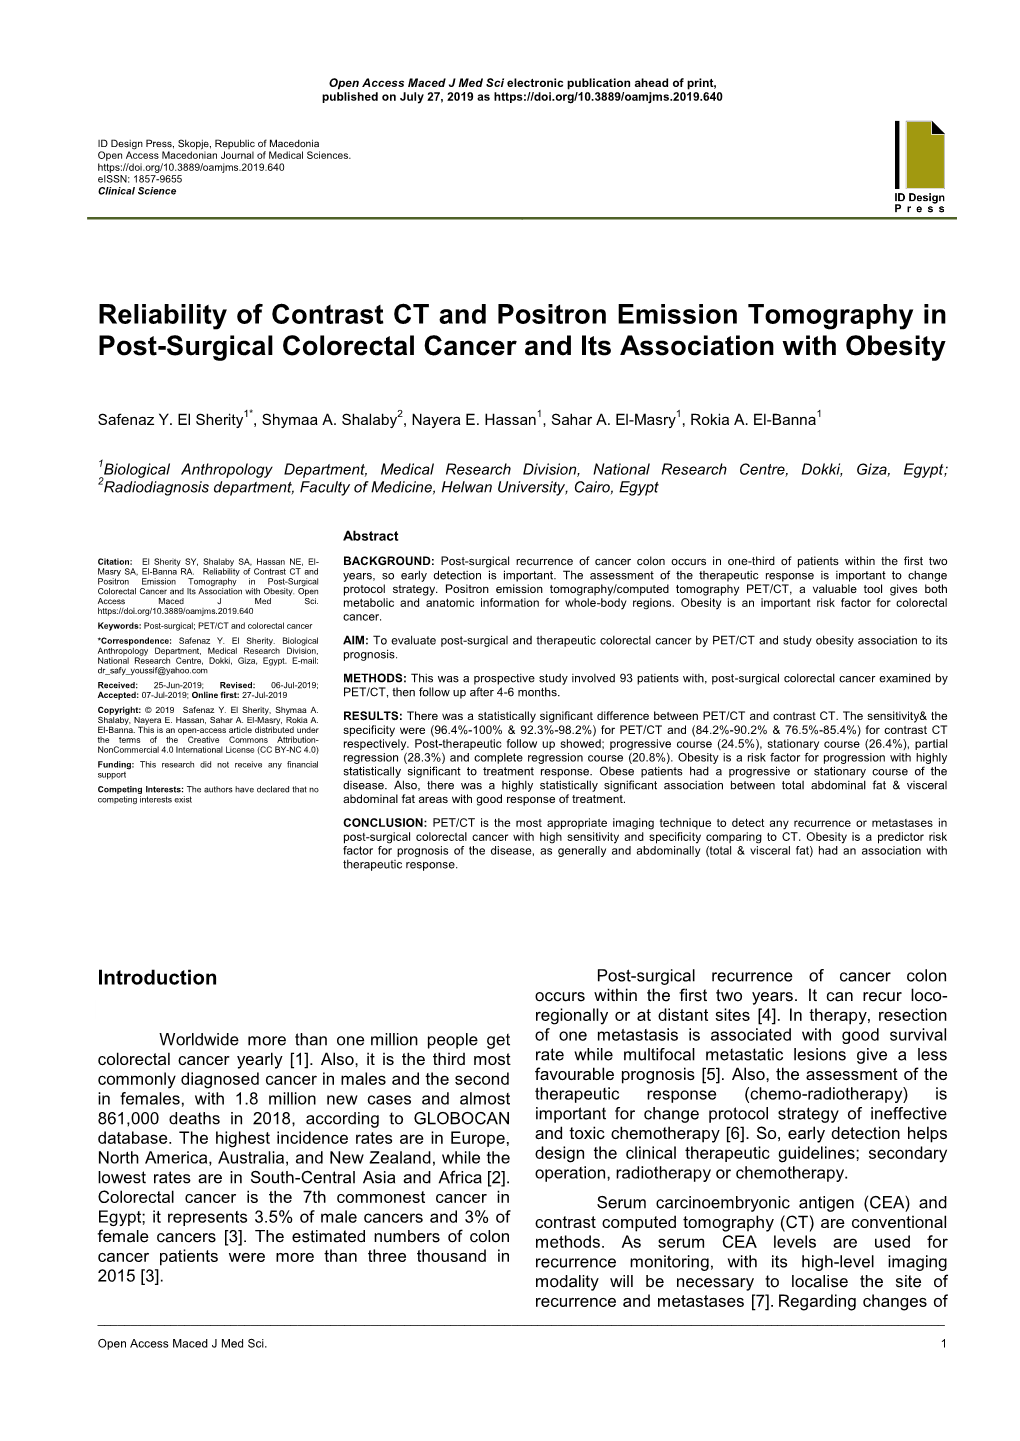 Reliability of Contrast CT and Positron Emission Tomography in Post-Surgical Colorectal Cancer and Its Association with Obesity